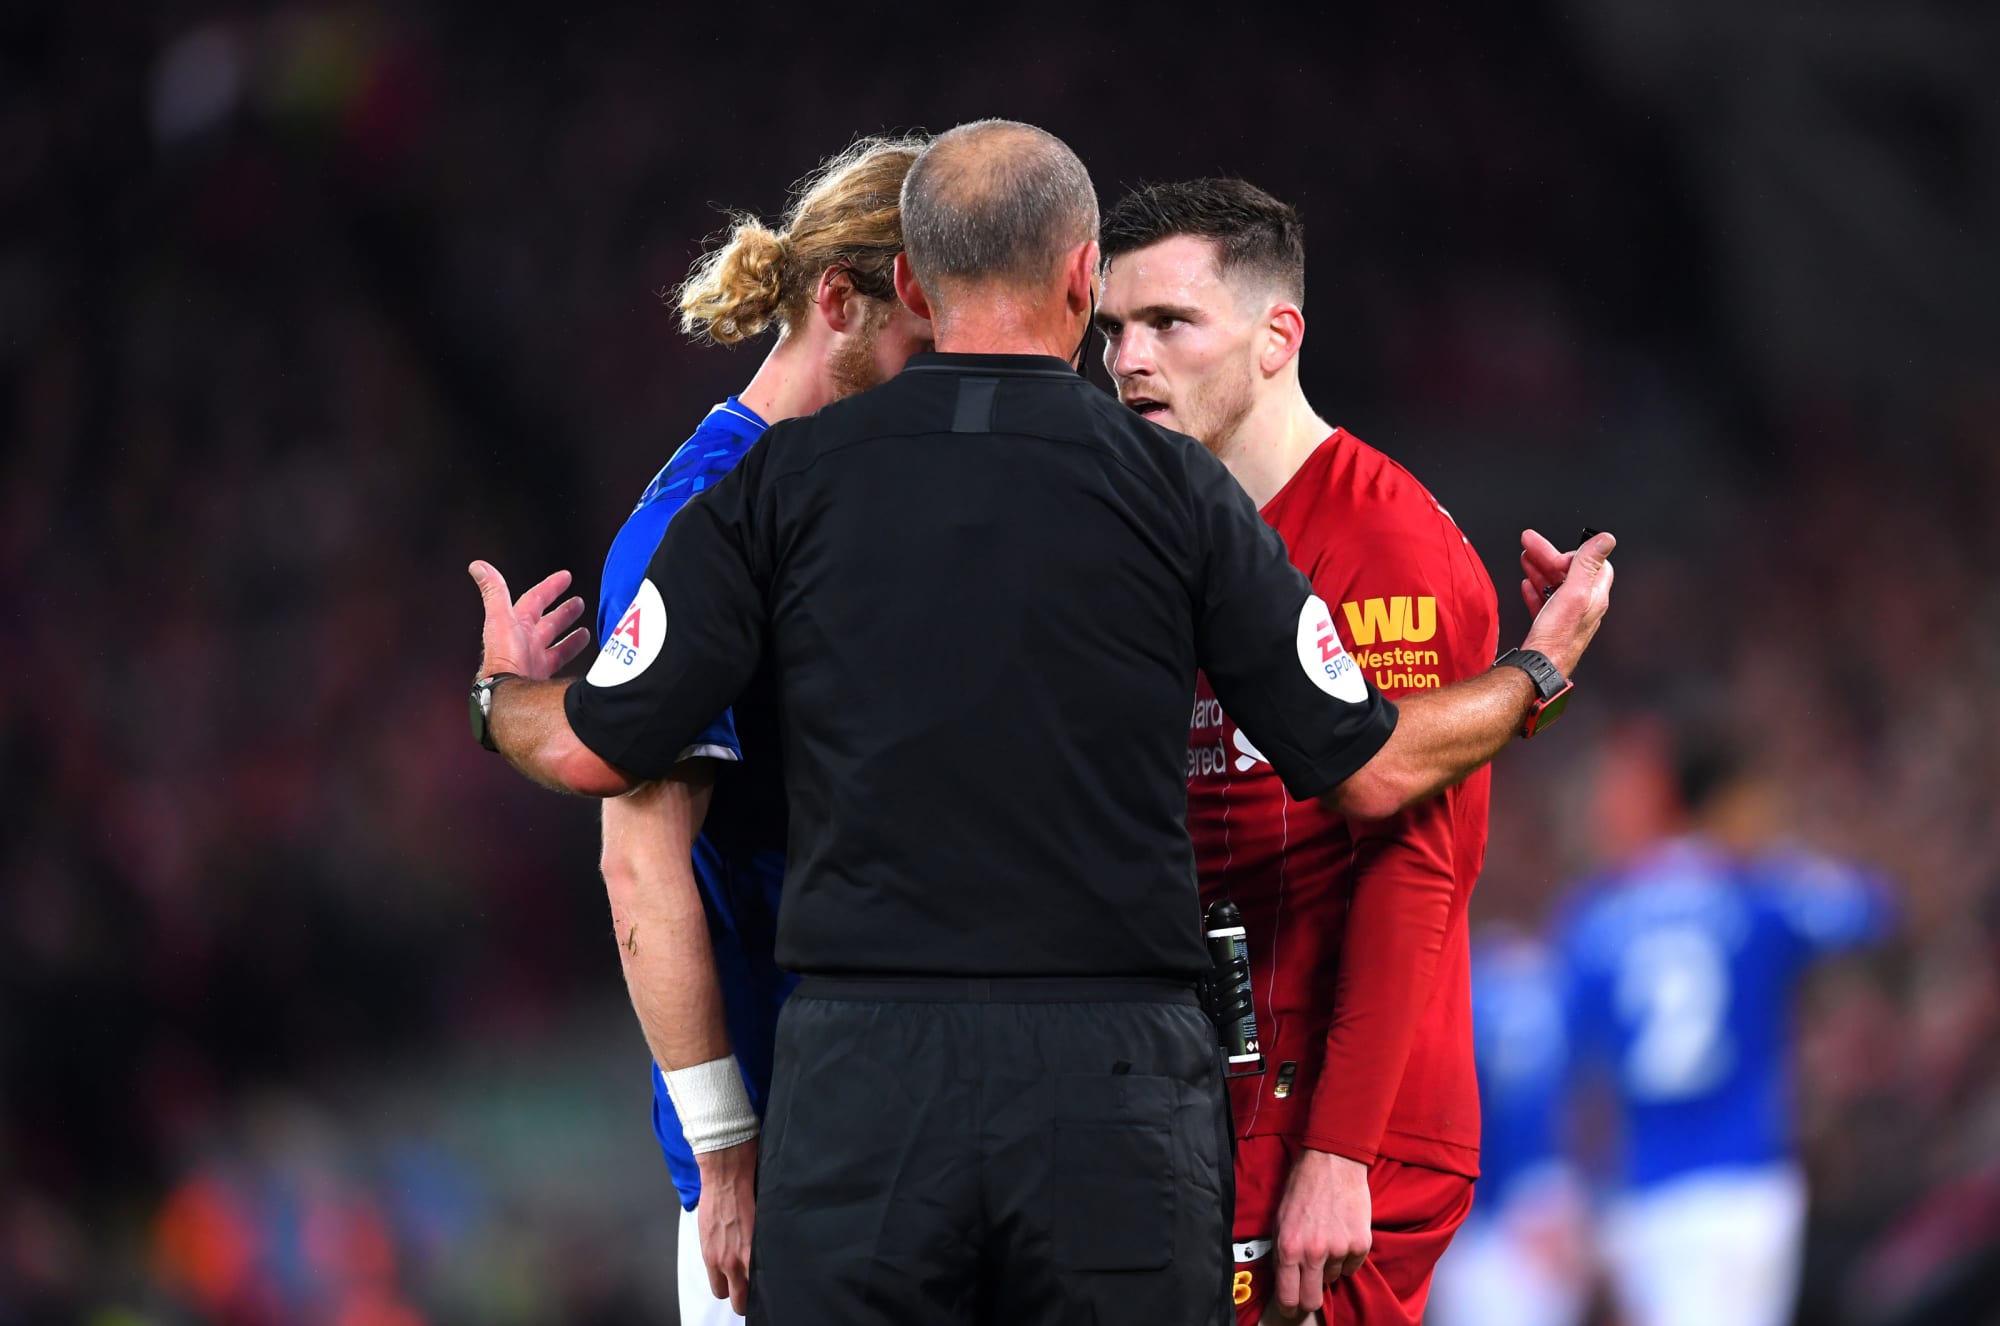 Liverpool news: Everton fans crying over ref choice for Liverpool game